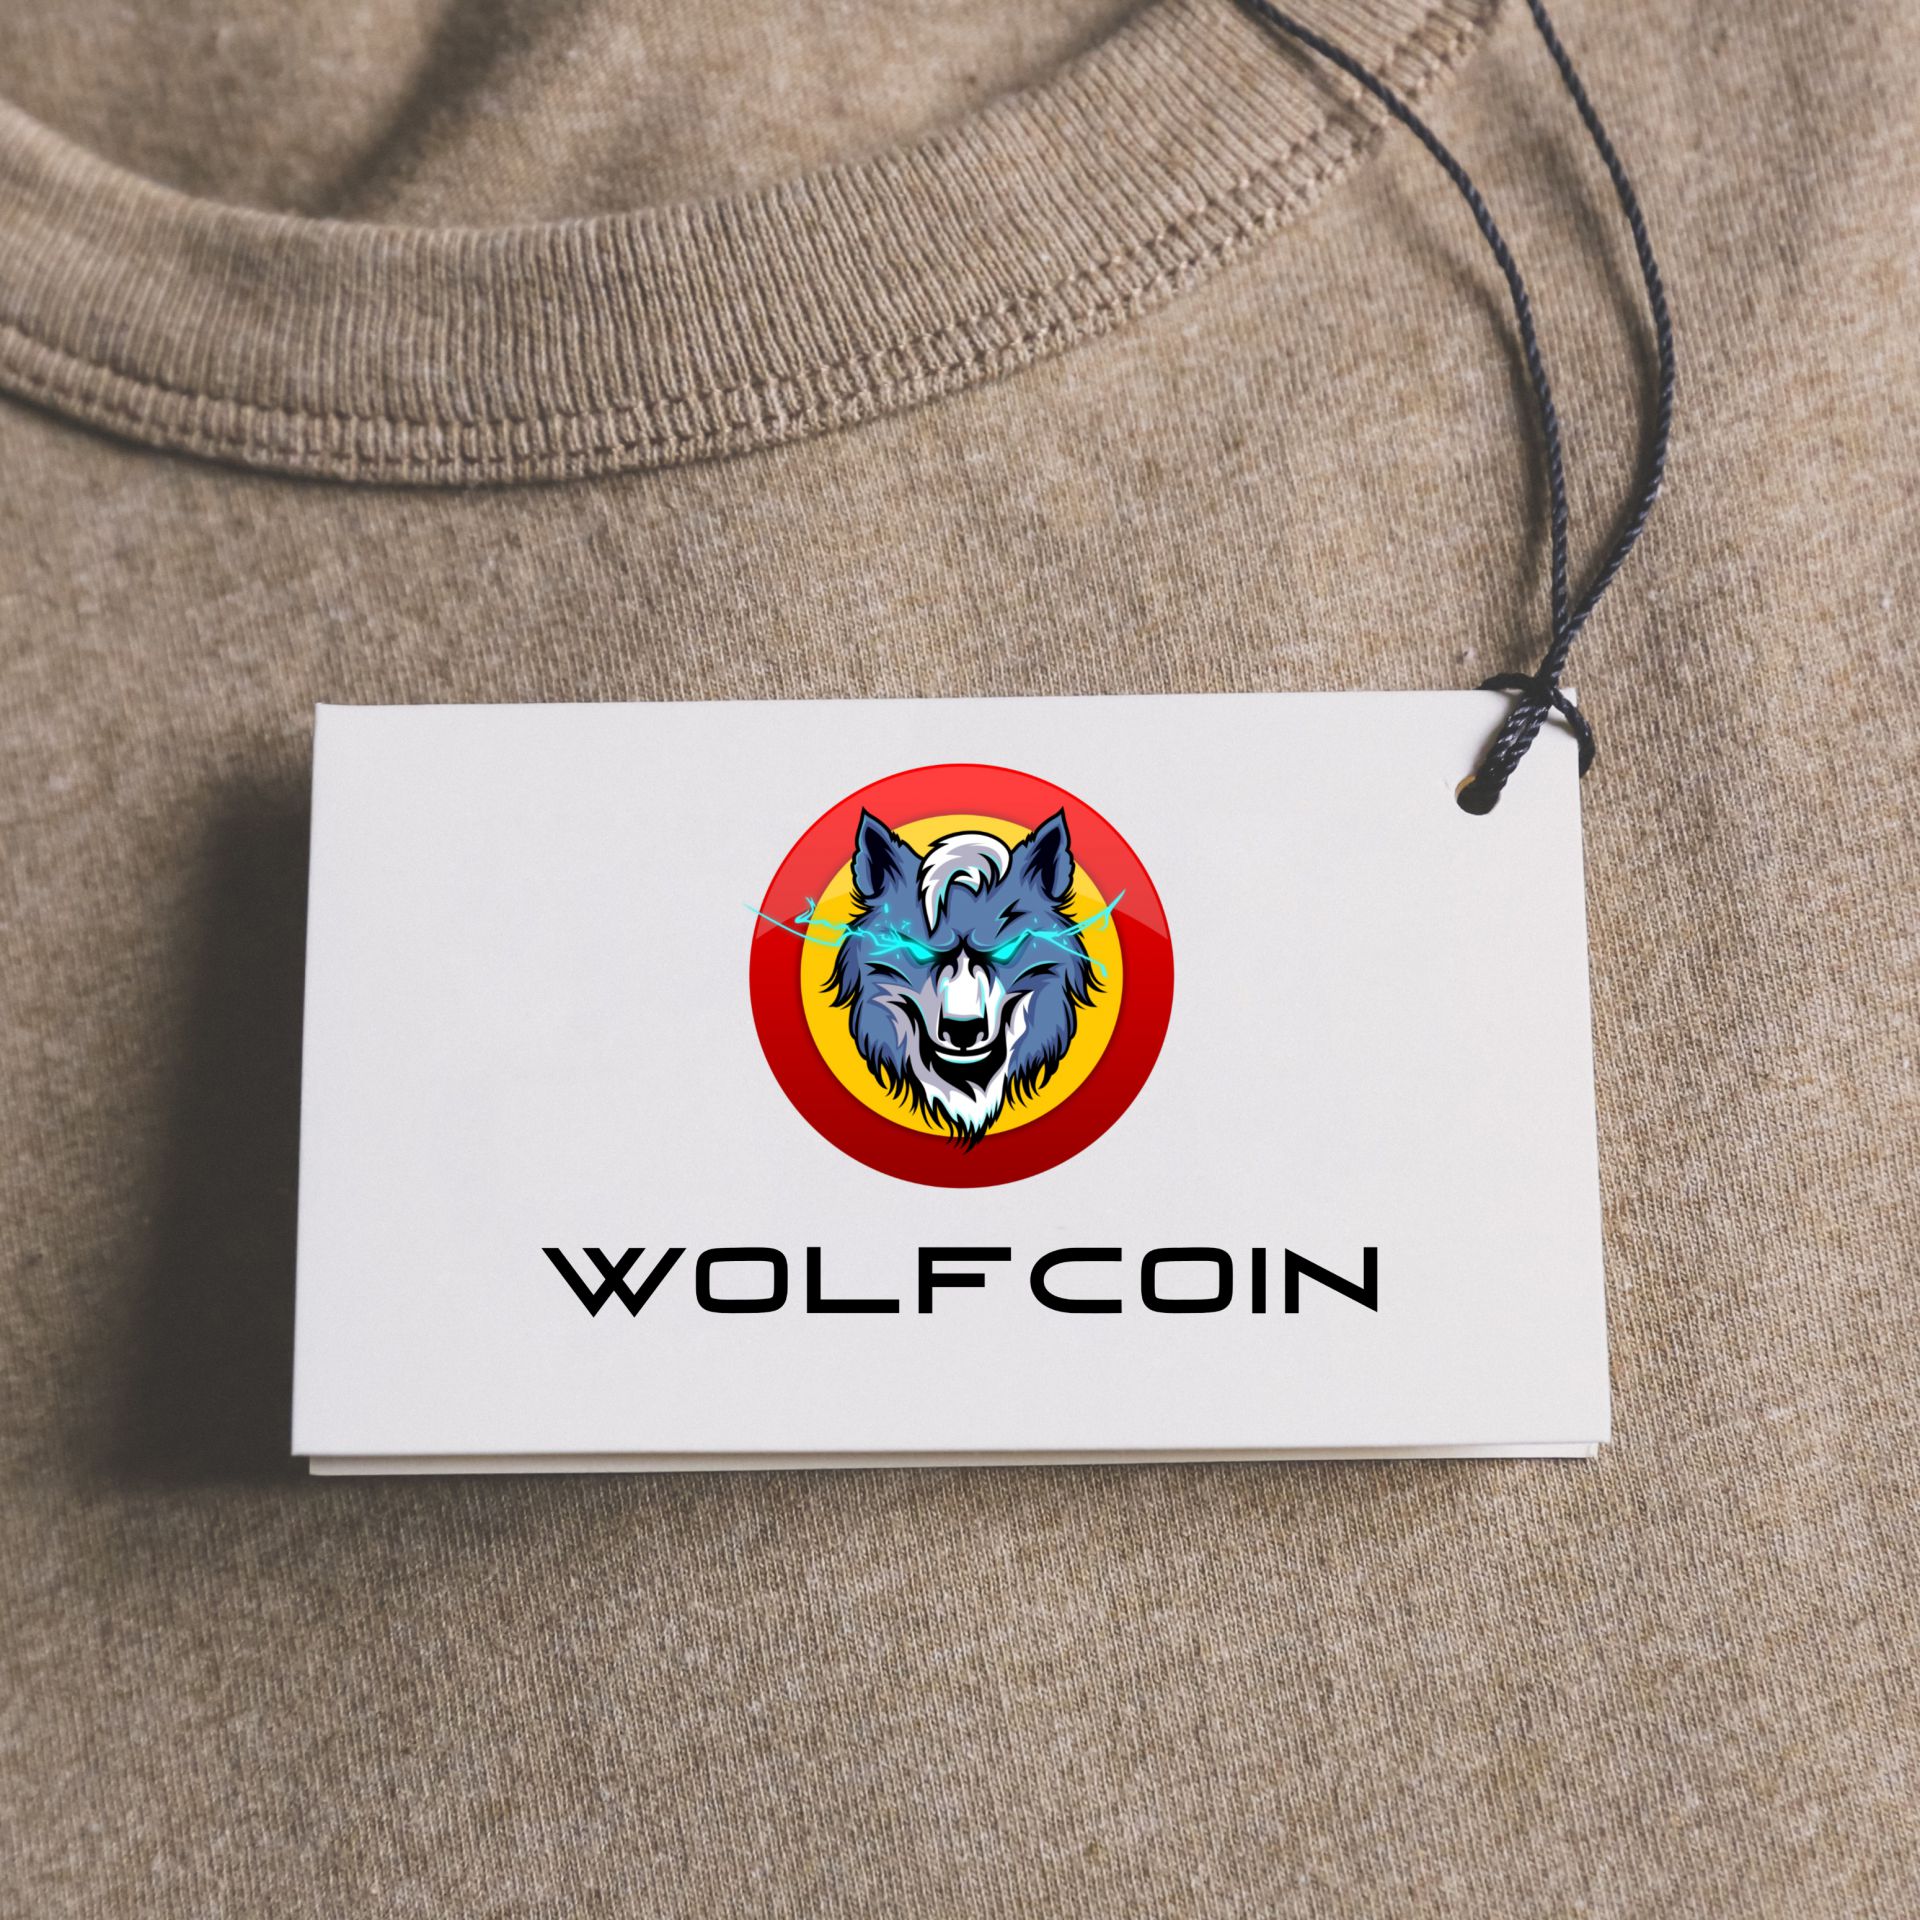 New t-shirts from the WOLFCOIN brand - WOLFCOIN Meme - 울프 밈 - 울프코리아 WOLFKOREAcloseclosecloseclosecloseclosecloseclosecloseclose